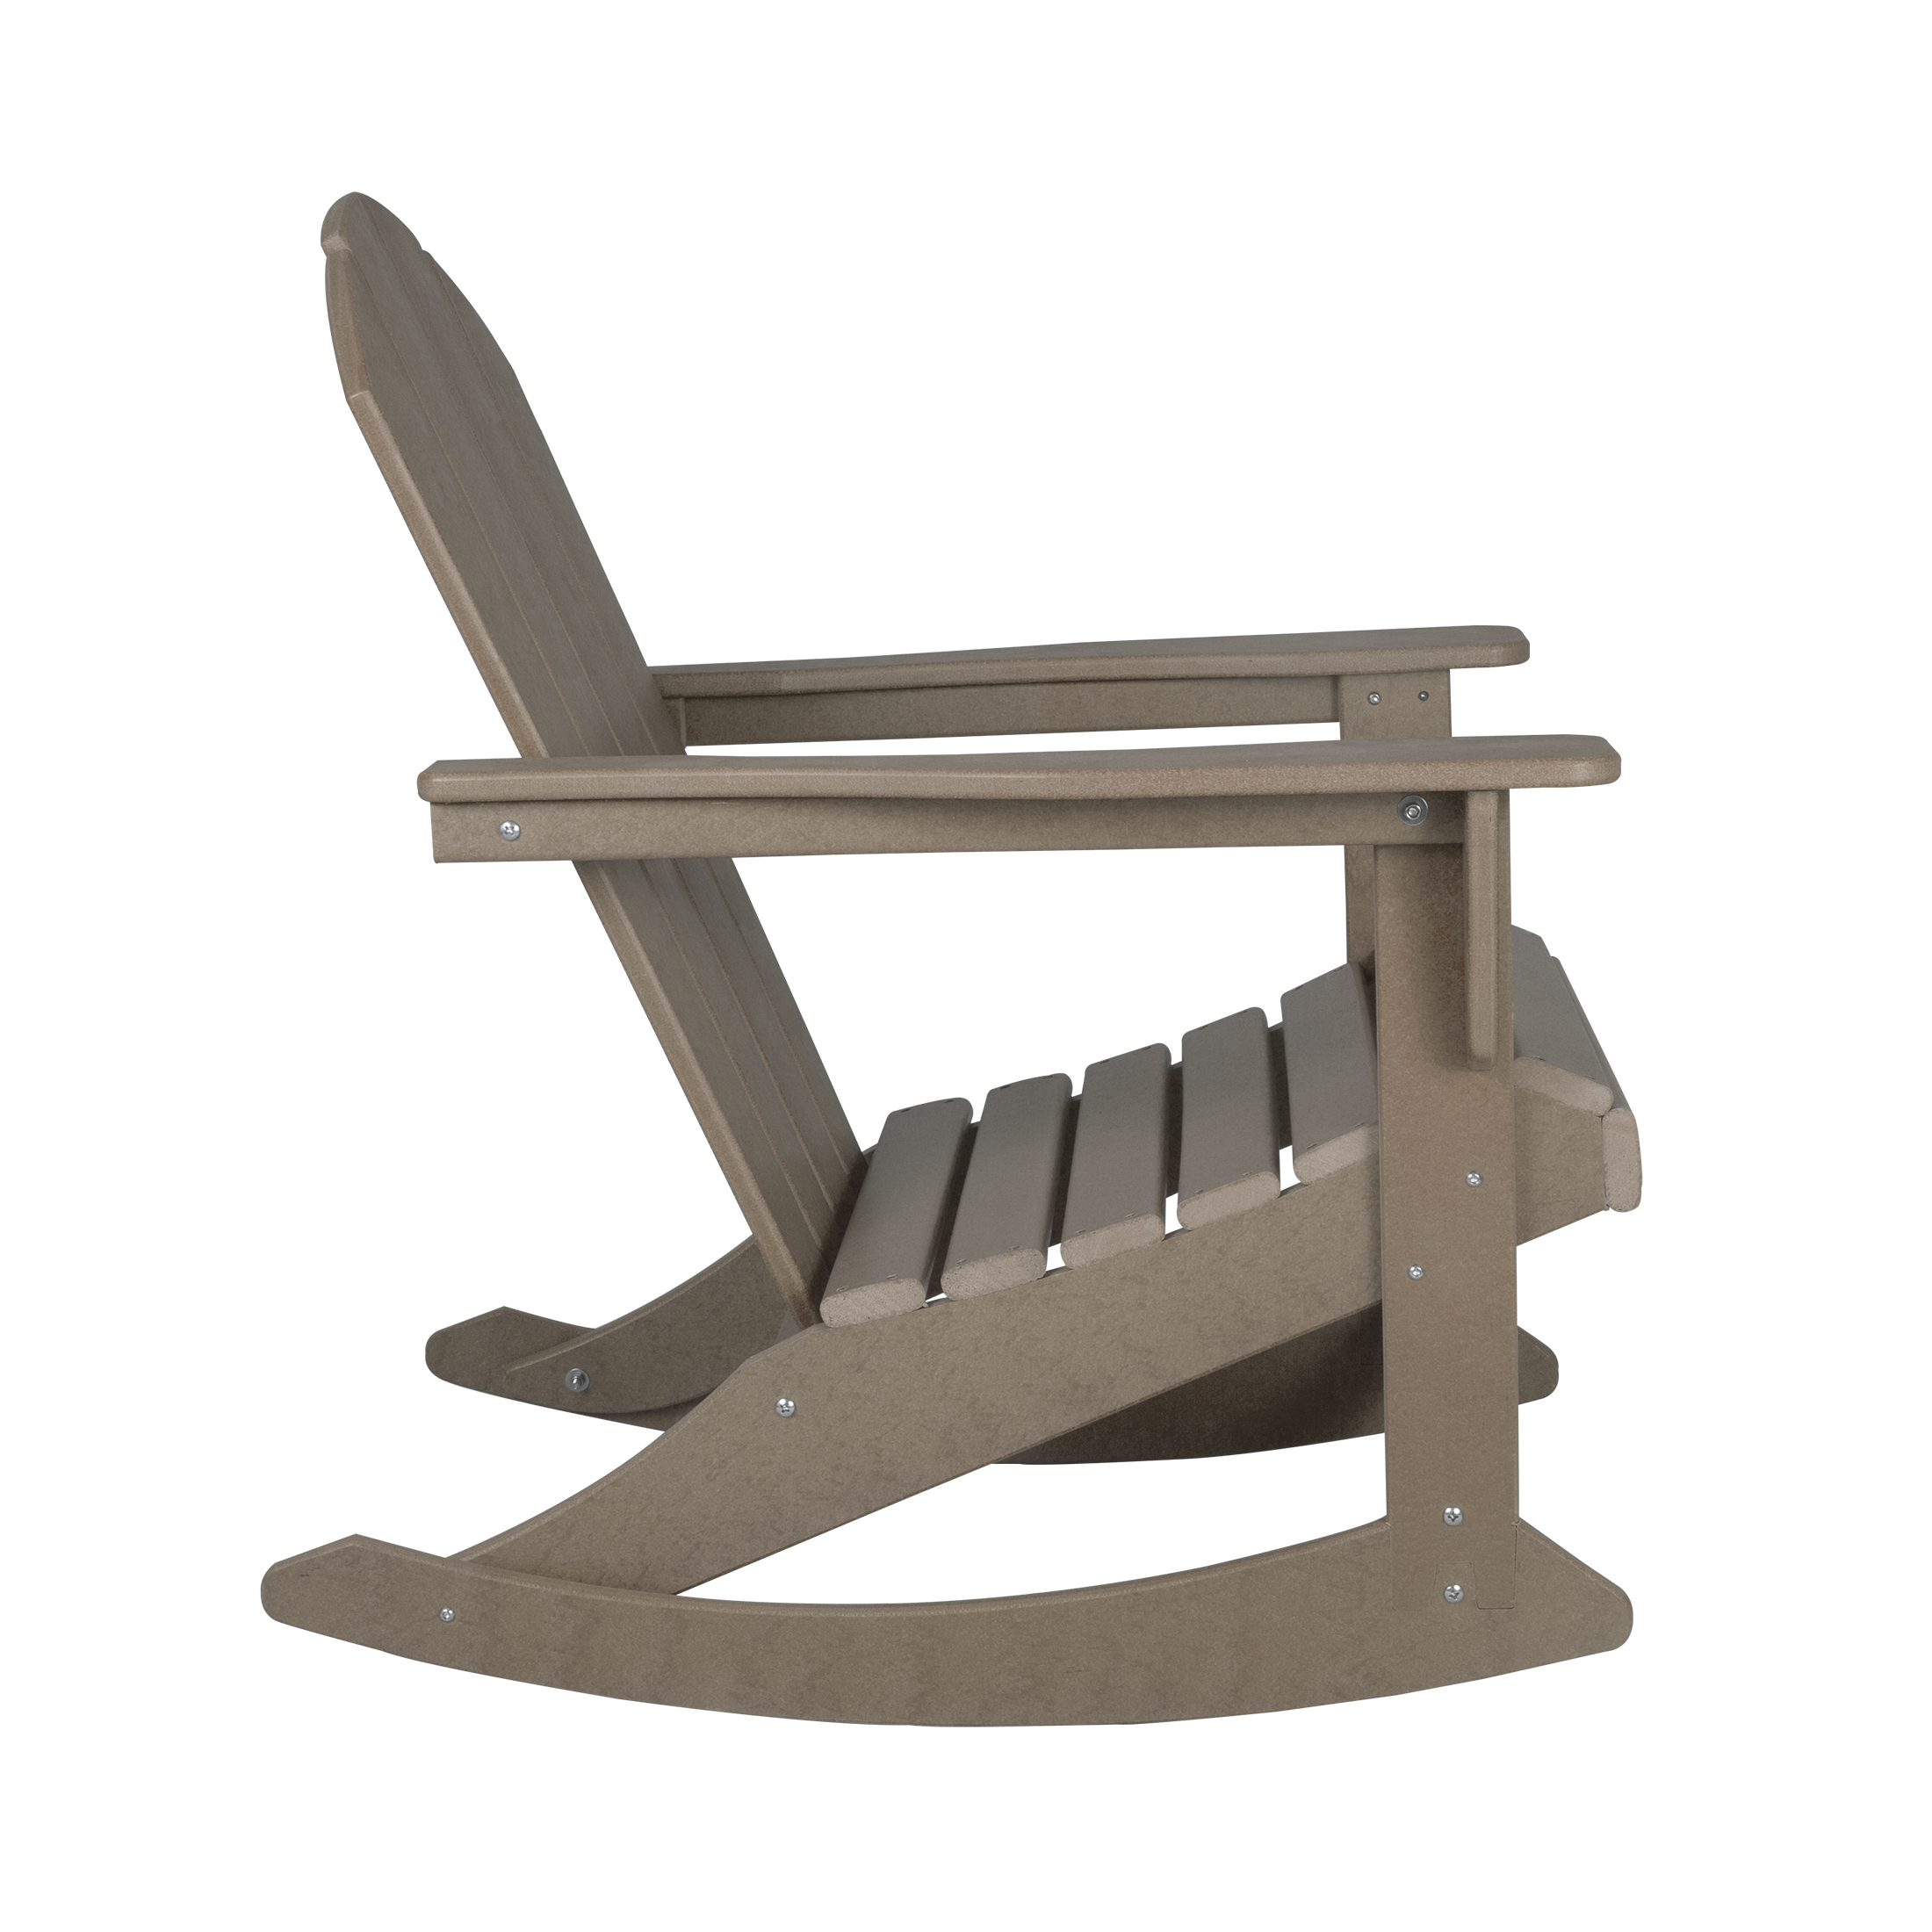 GARDEN Plastic Adirondack Rocking Chair for Outdoor Patio Porch Seating, Weathered Wood - image 4 of 7